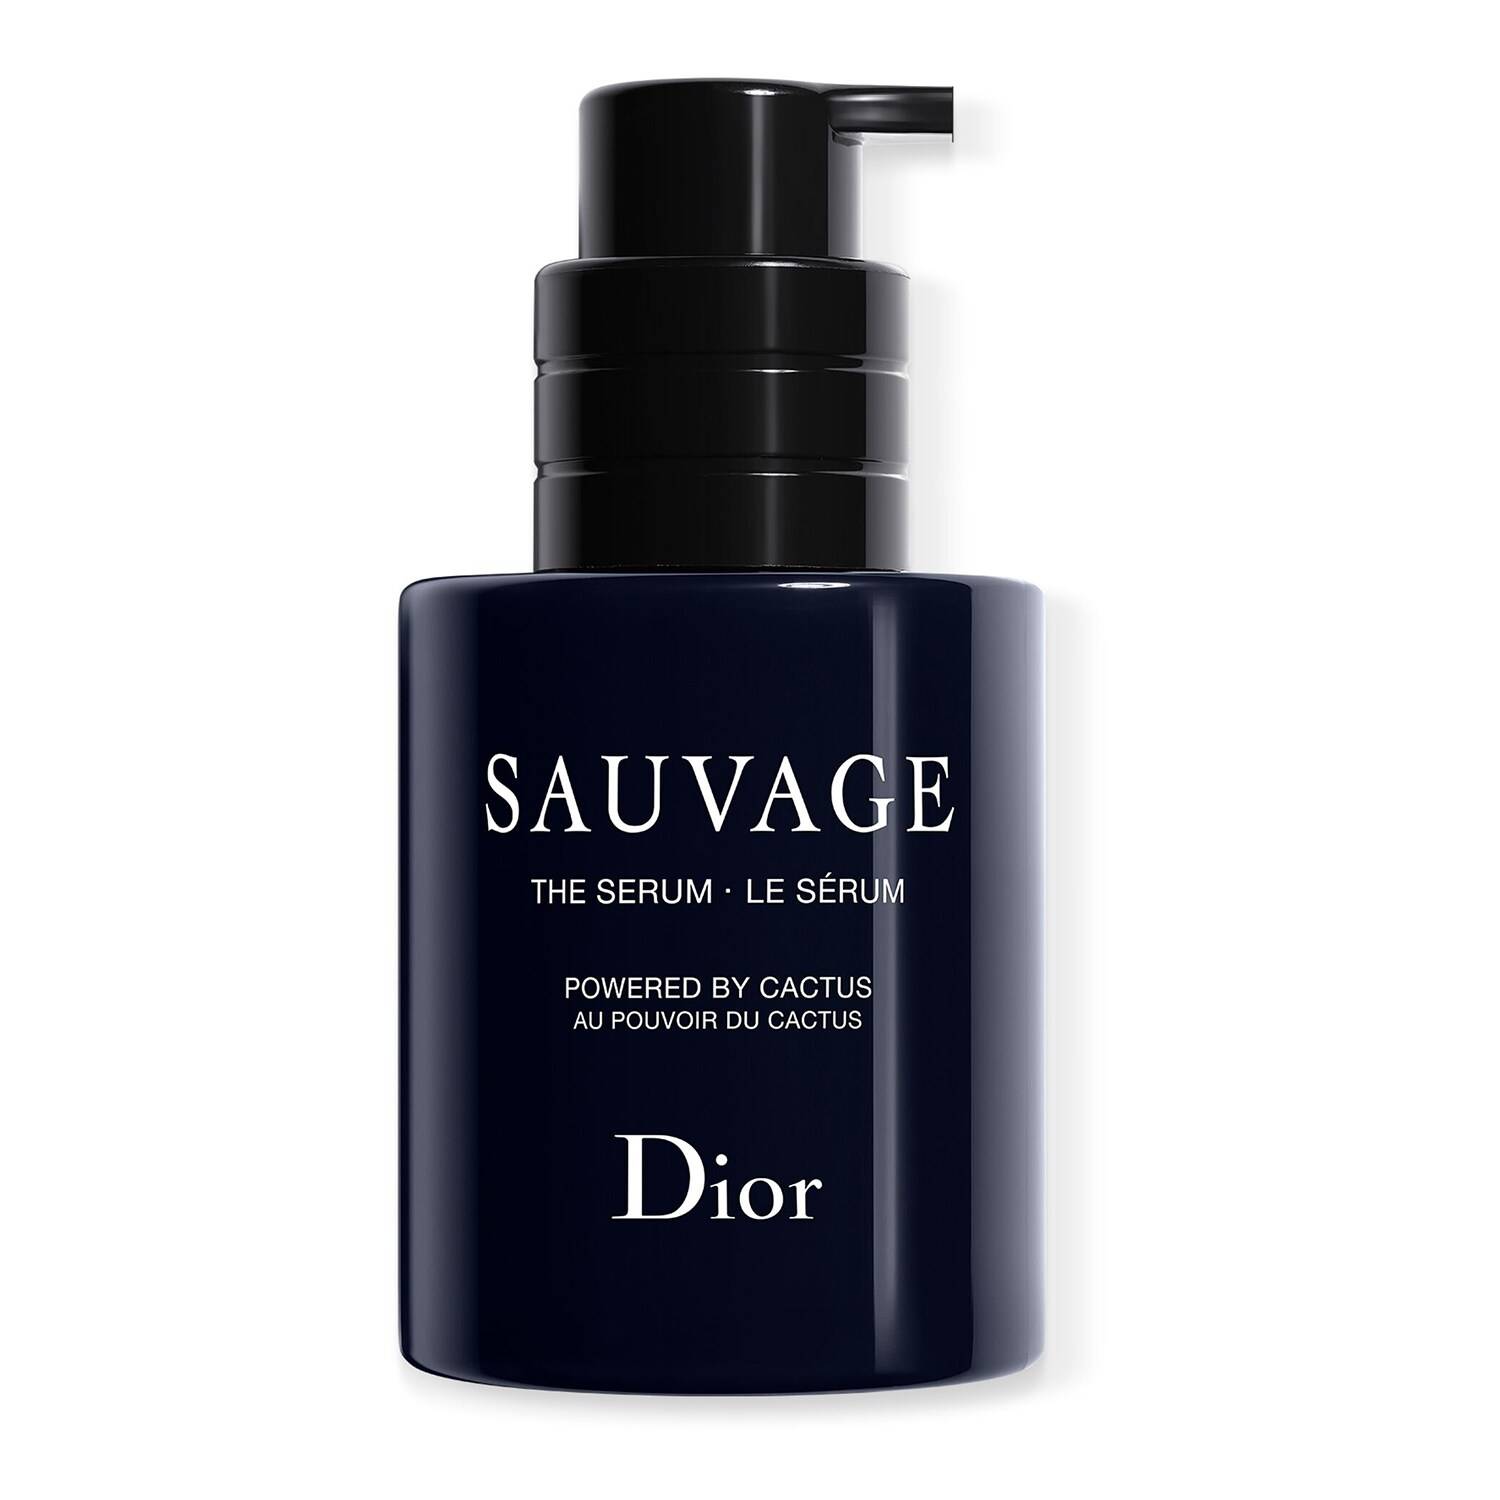 DIOR Sauvage The Serum - Face Serum Powered by Cactus for Men 50 ml